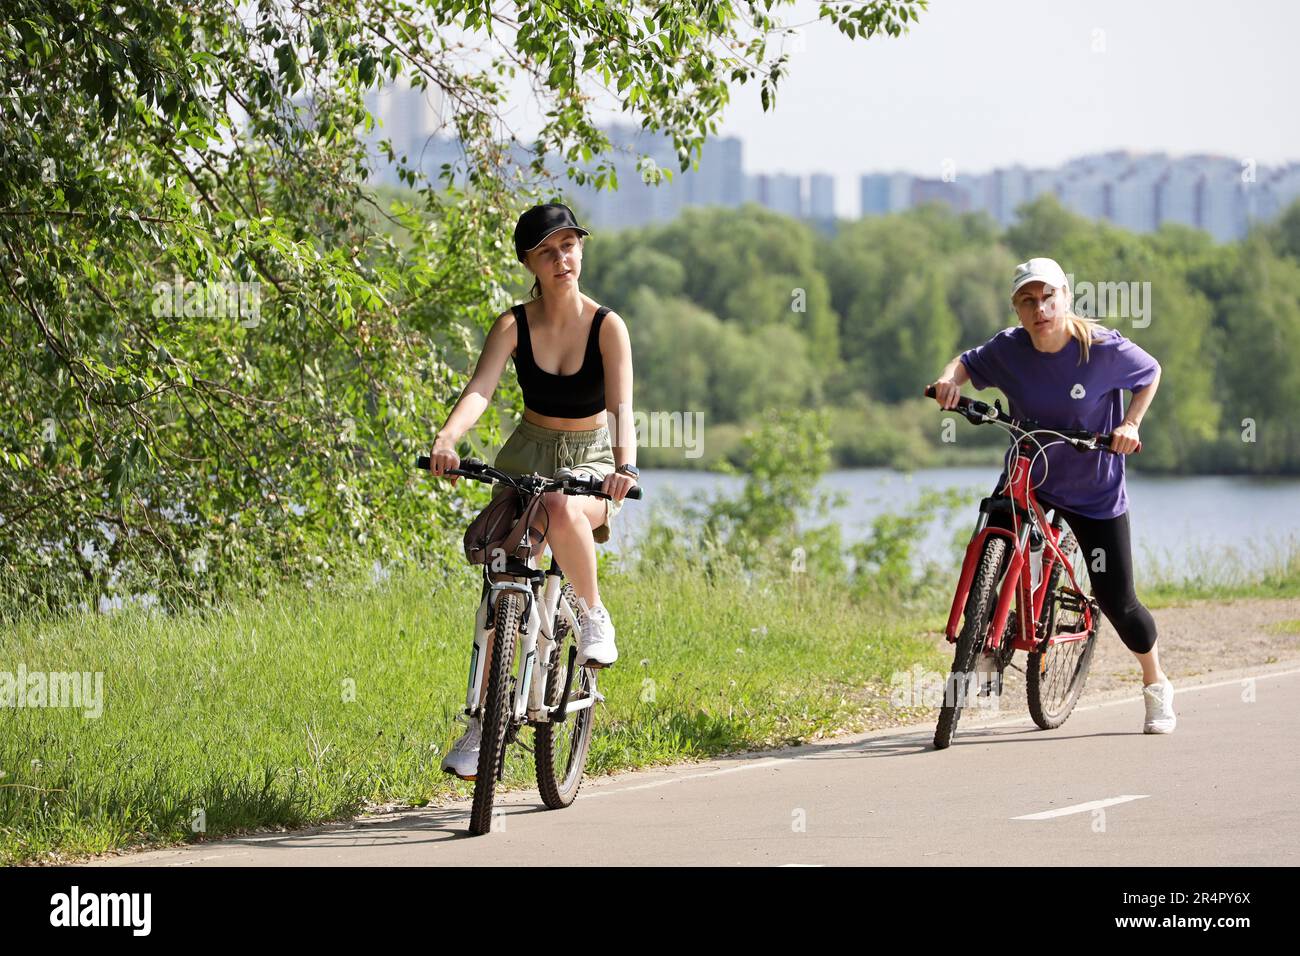 Cycling and leisure in city park. Two girls riding bicycles on river bank Stock Photo